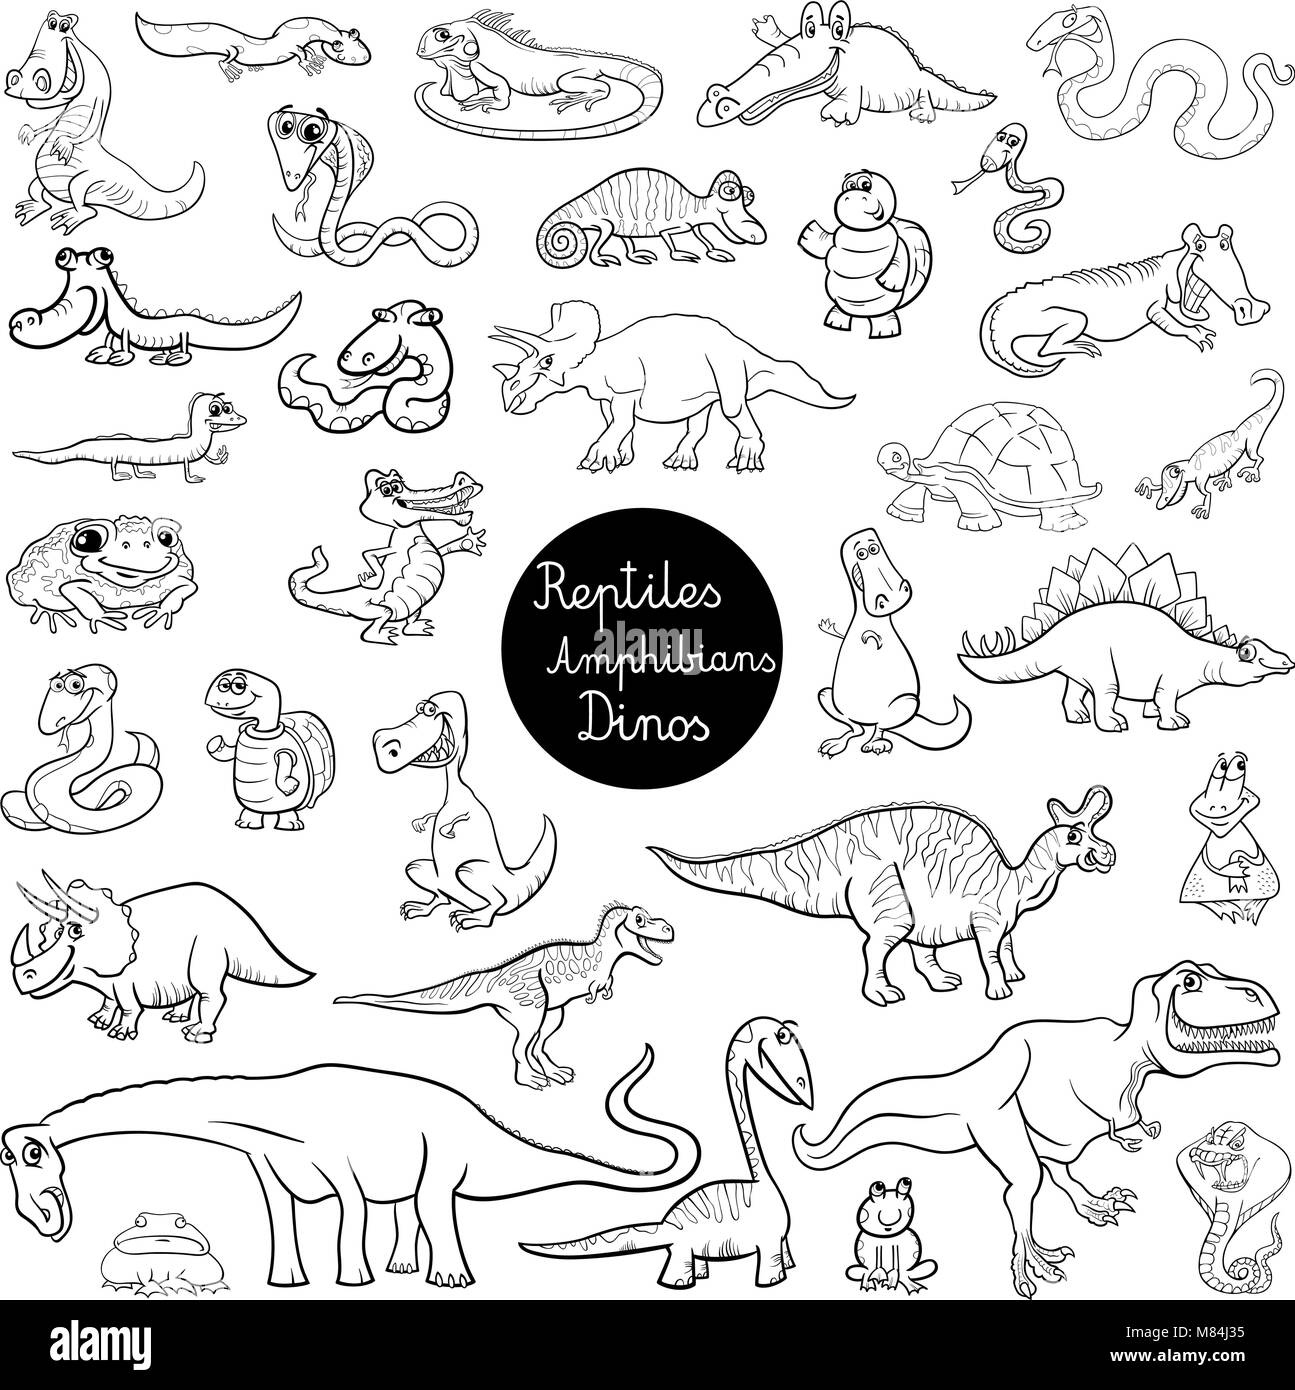 Black and White Cartoon Illustration of Reptiles and Amphibians Animal Characters Big Set Coloring Book Stock Vector